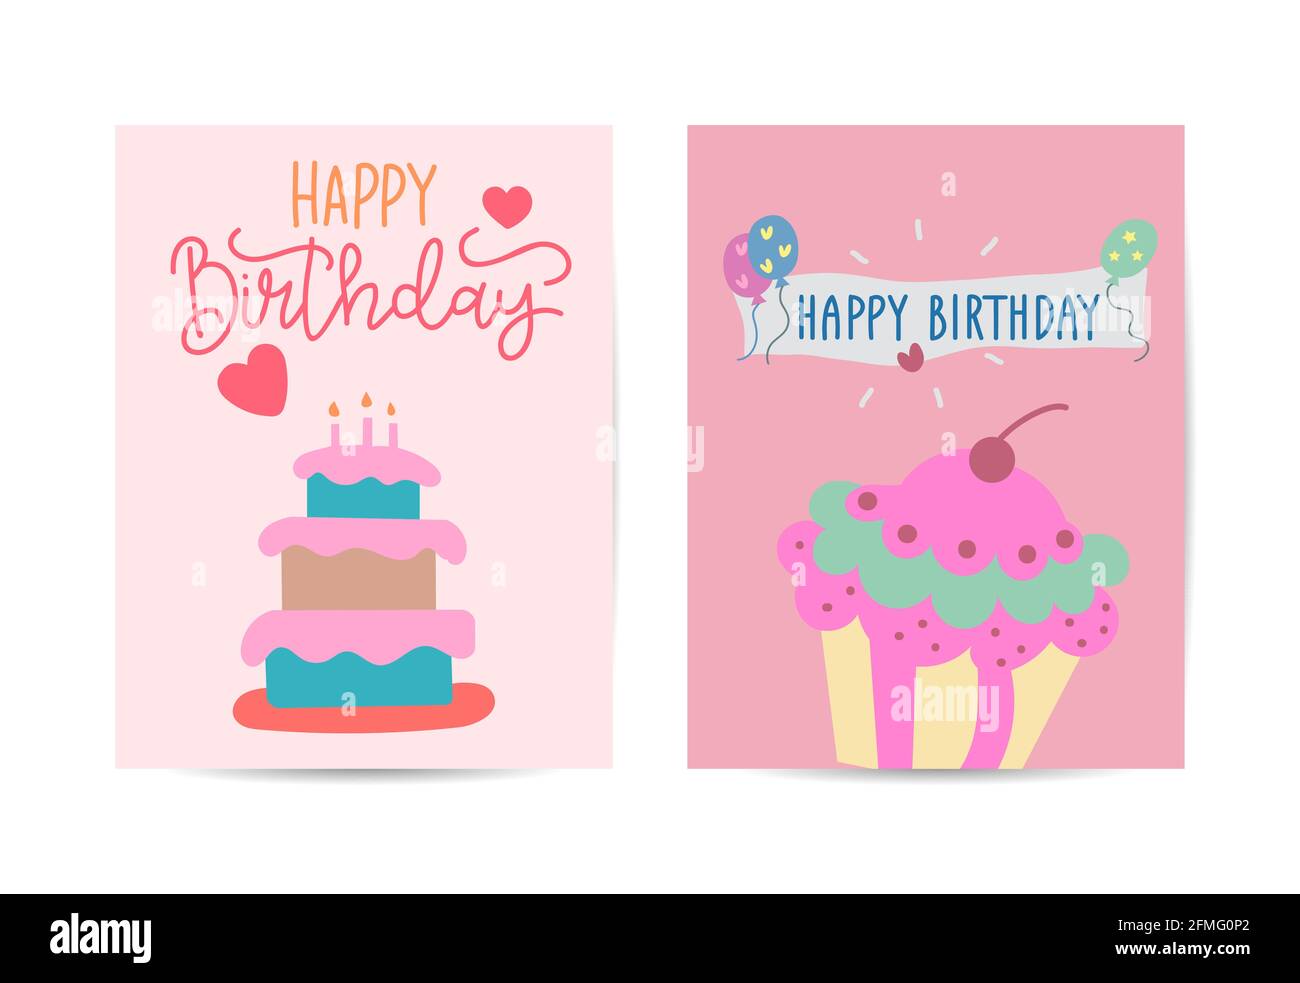 Birthday cards set Vector with cake illustration Stock Vector